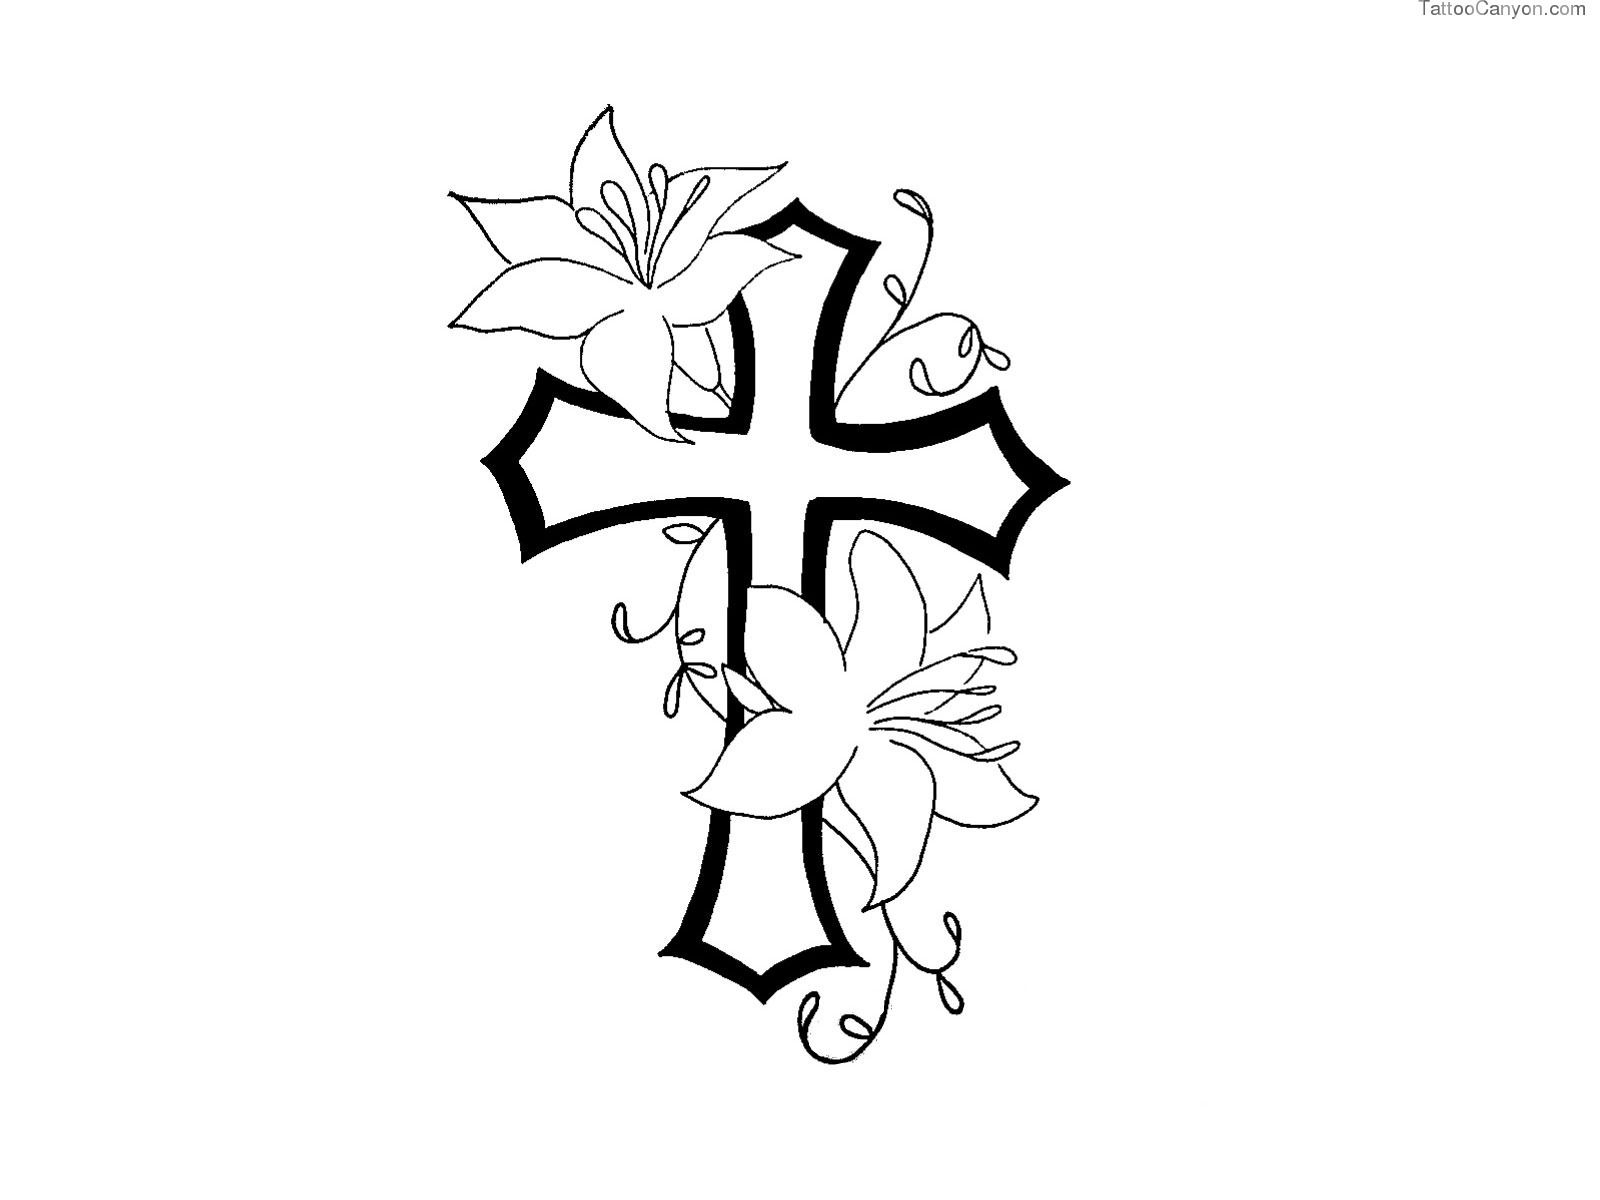 Free Designs Cross With Flower Contour Tattoo Wallpaper Picture intended for dimensions 1600 X 1200